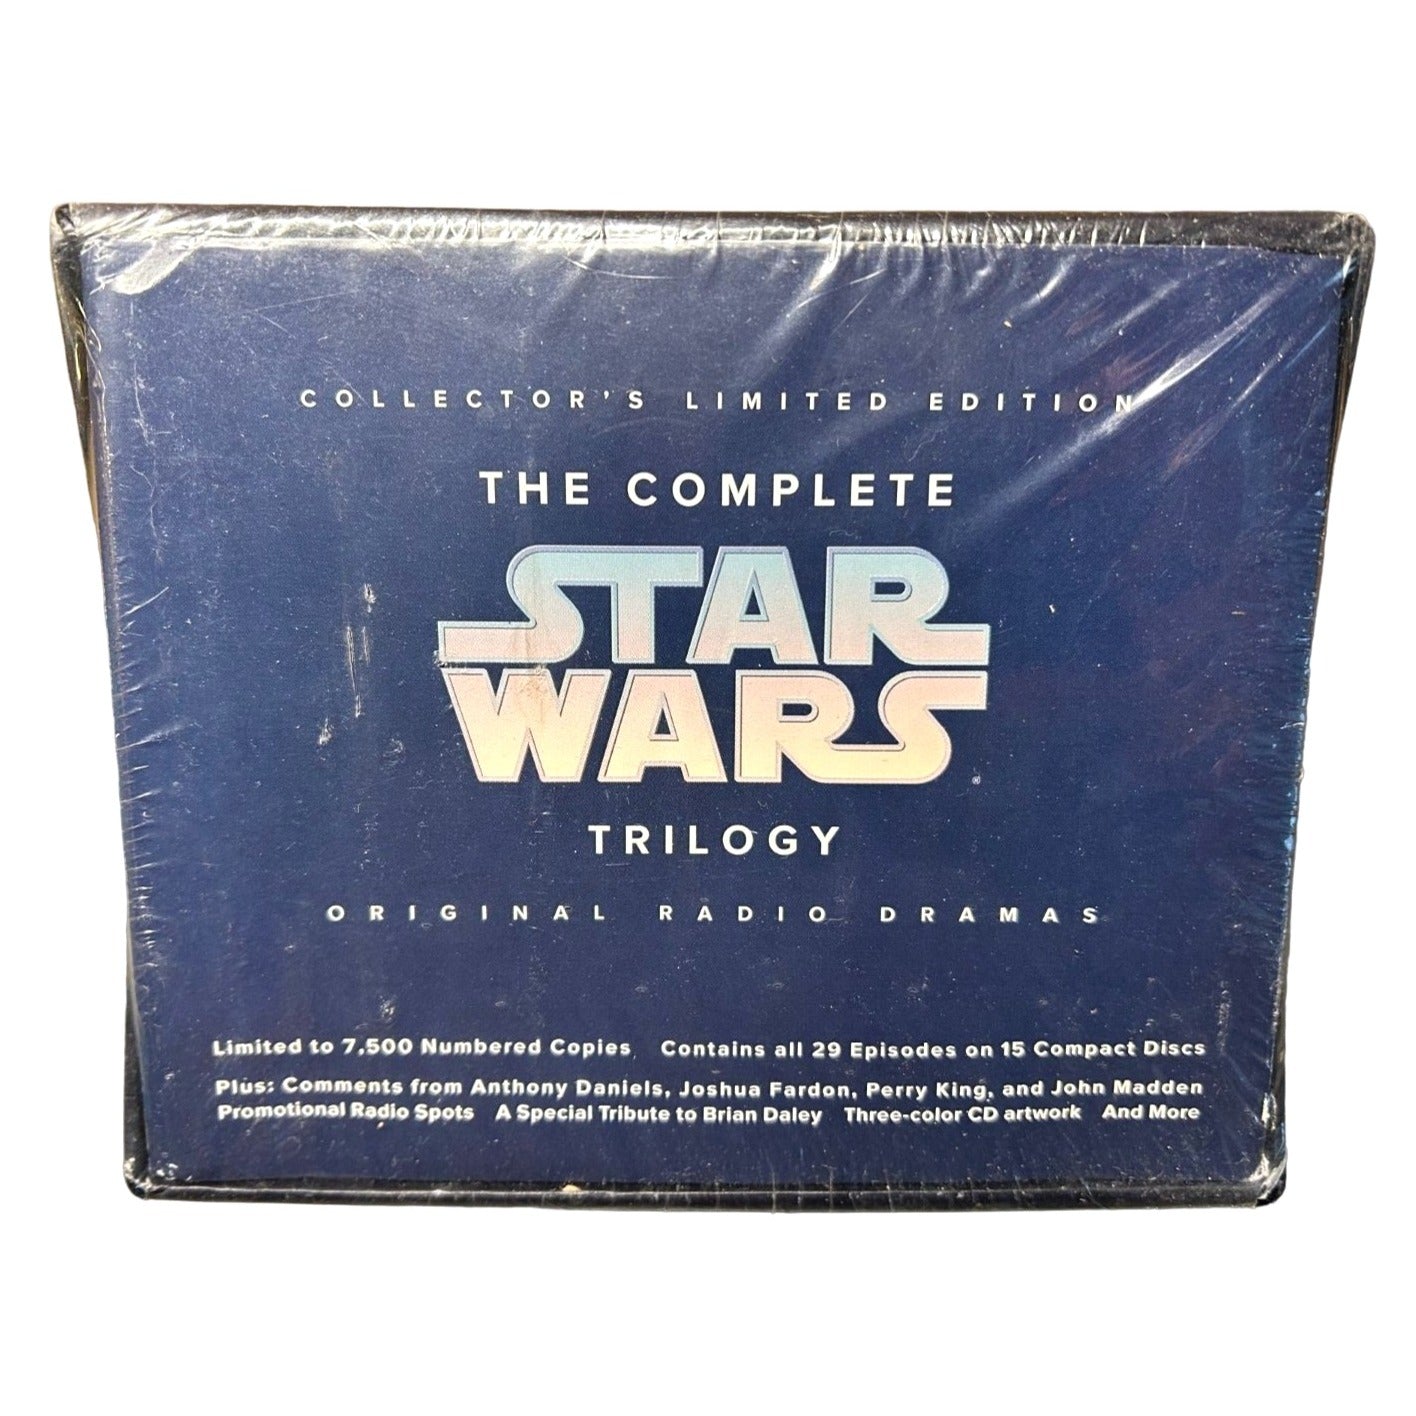 The Complete Star Wars Trilogy Original Radio Dramas CDs Collector's Limited Ed.